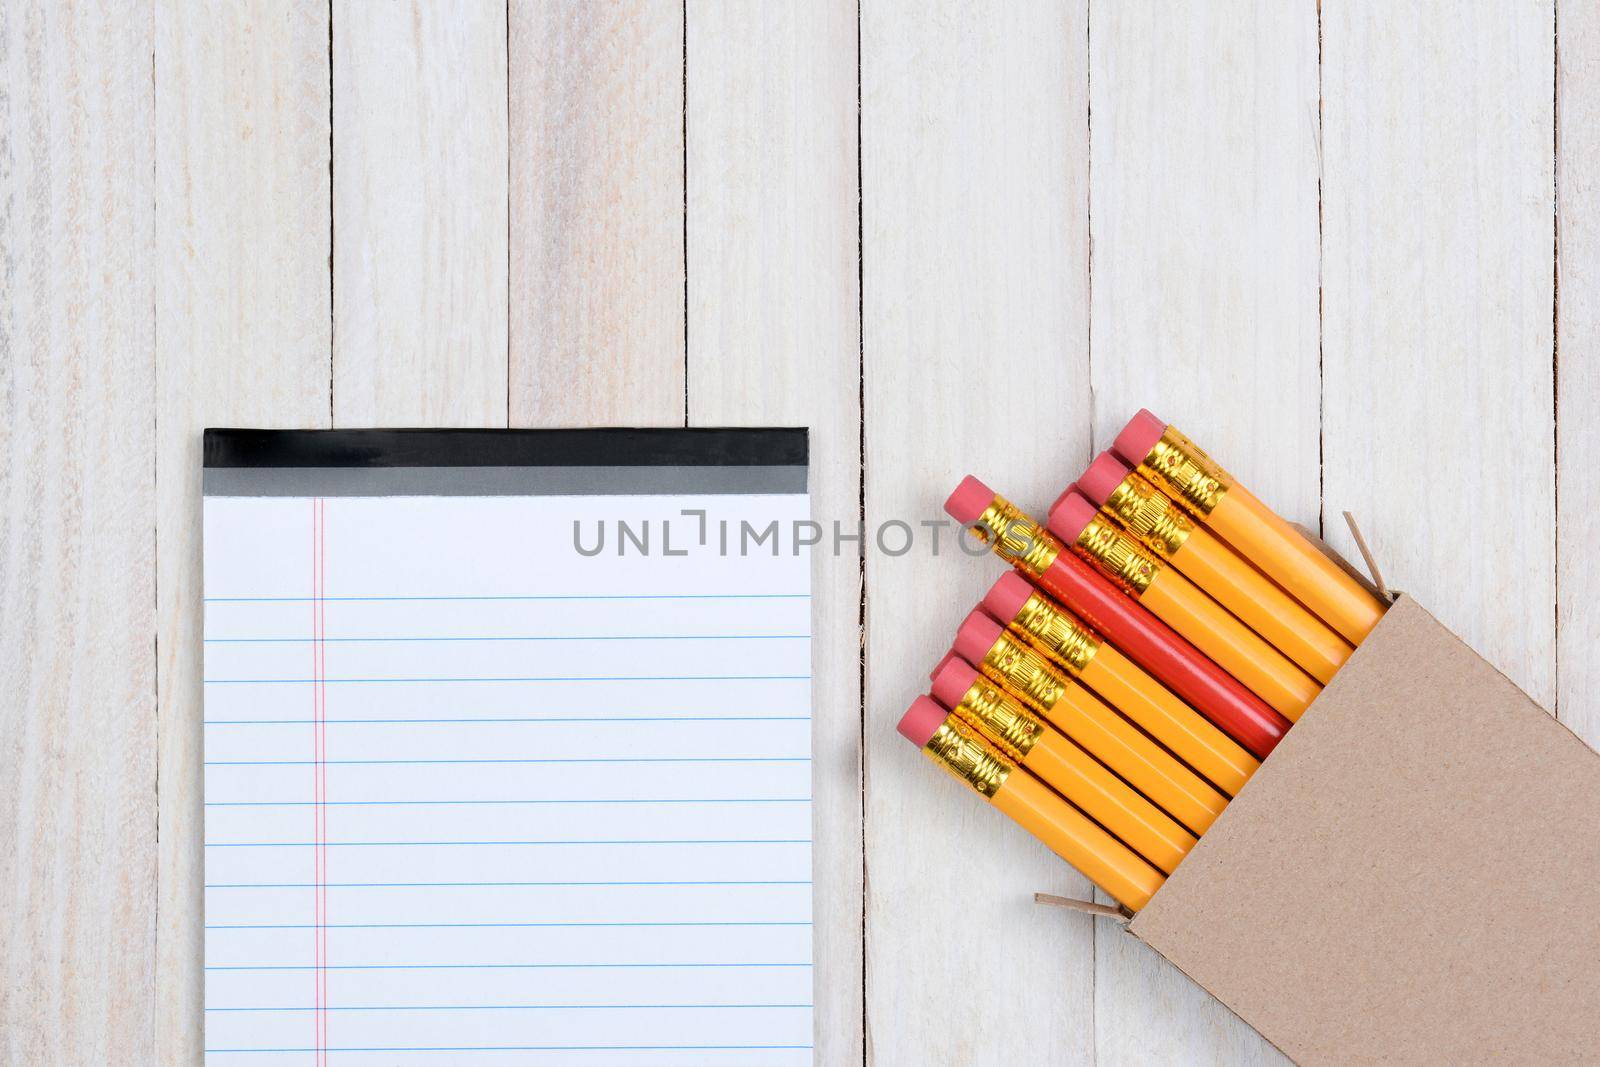 A box of yellow pencils with one red pencil partially pulled out. The plain brown box is in the lower right corner of the frame at an angle, and a blank note pad is next to the box.